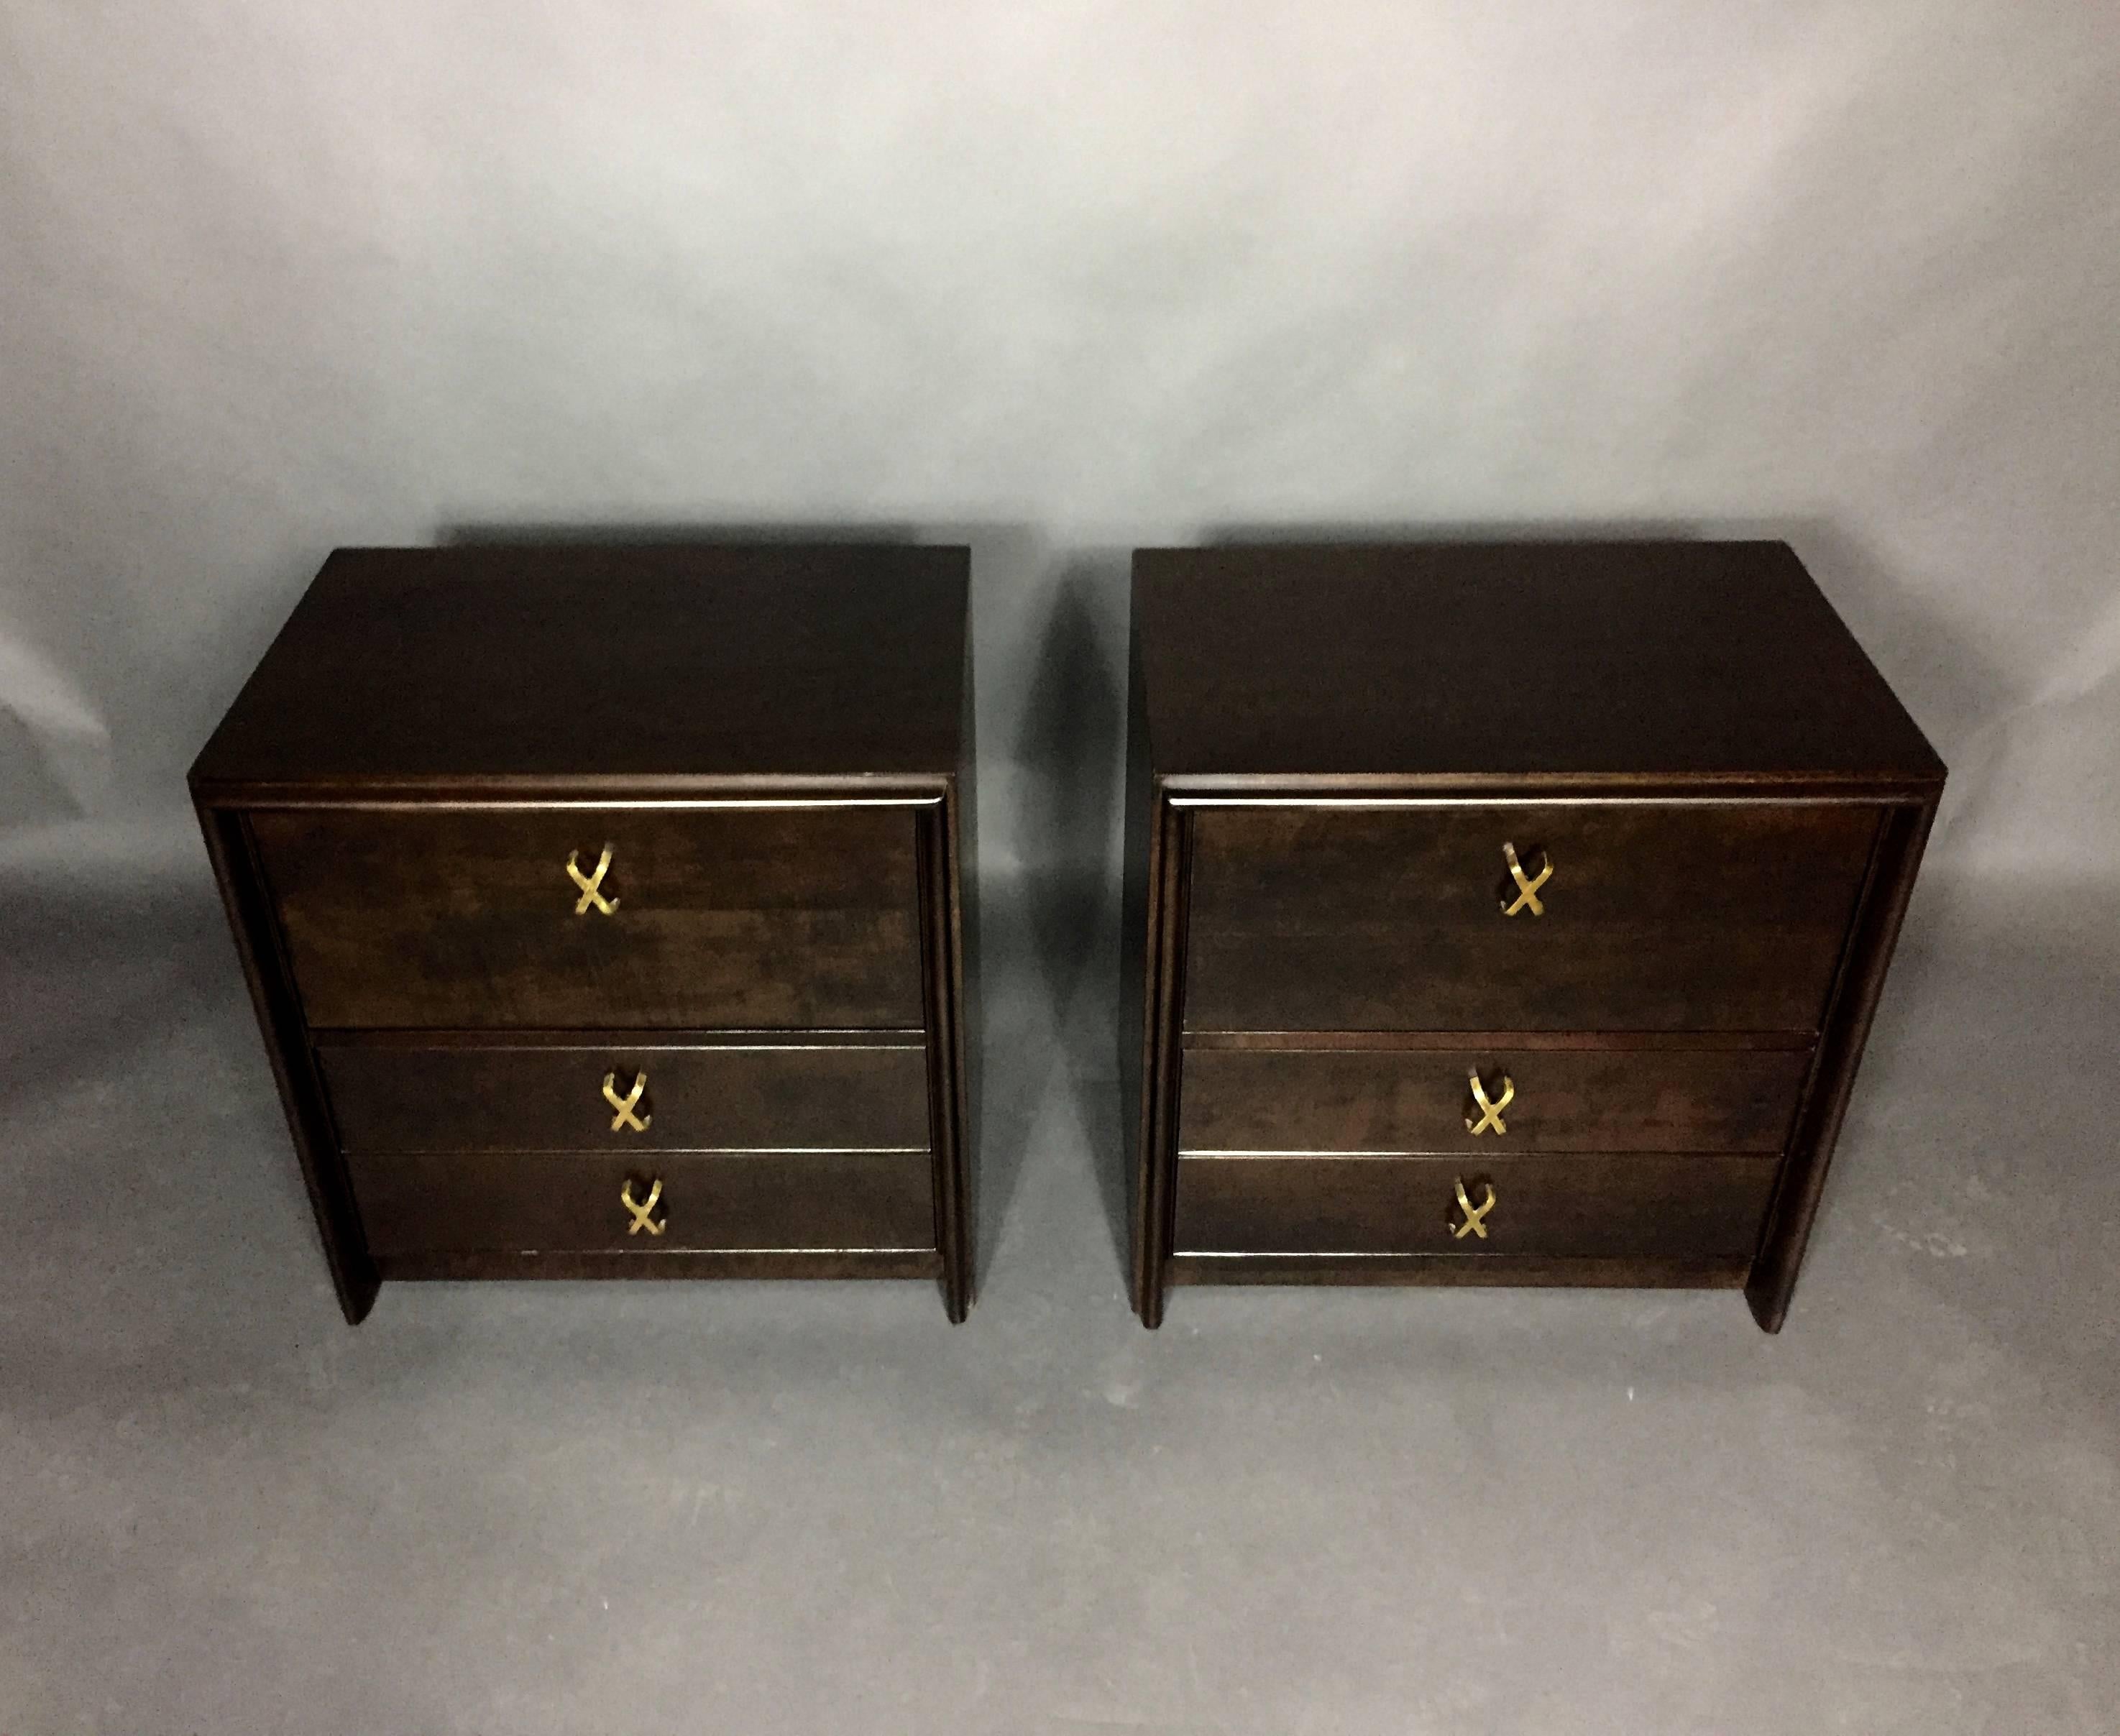 This pair of lacquered birch nightstands were recently refinished in a gorgeous black stain over the original light birch finish, showing a perfect and rich brown visual. Iconic brass X-drawer pulls. Each chest has a drop-down top-front drawer over